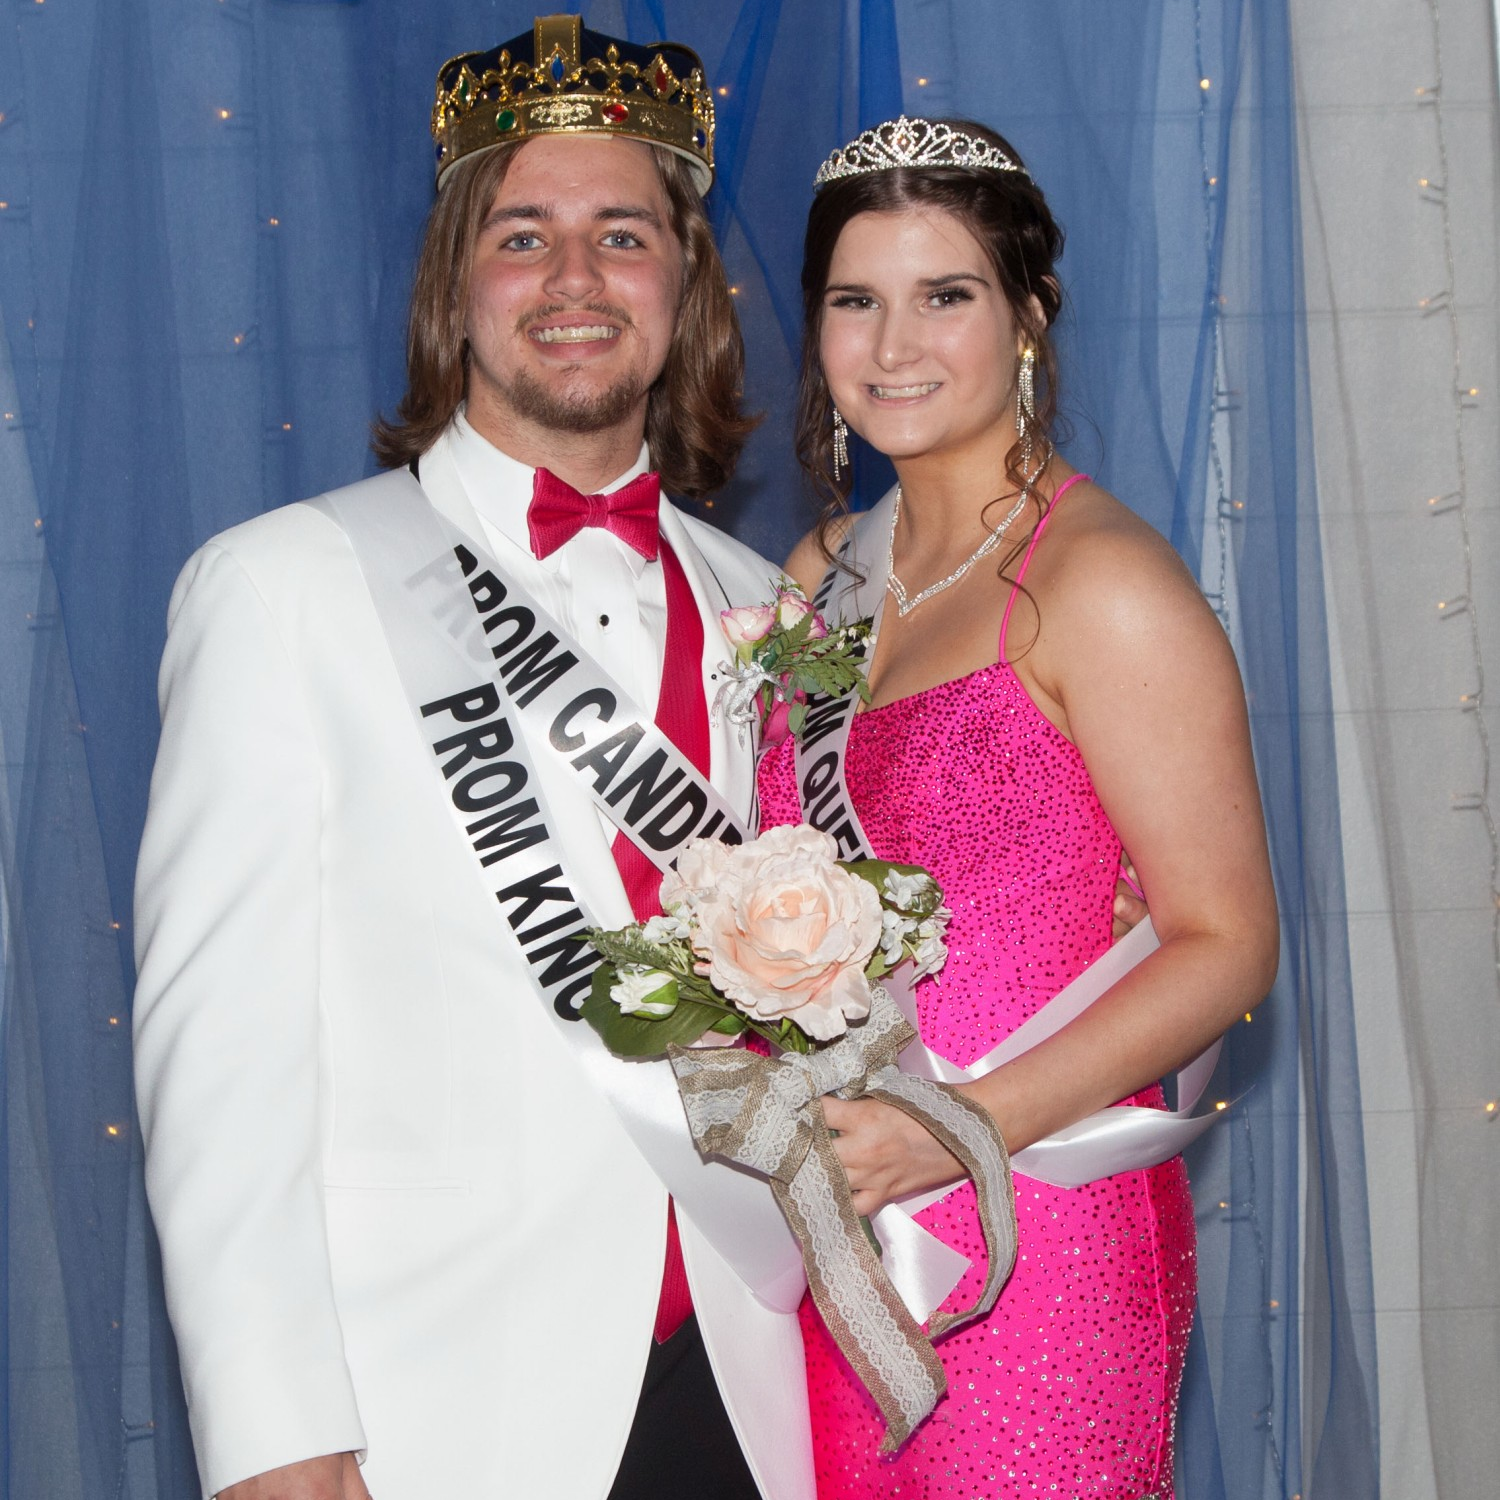 Prom King and Queen image